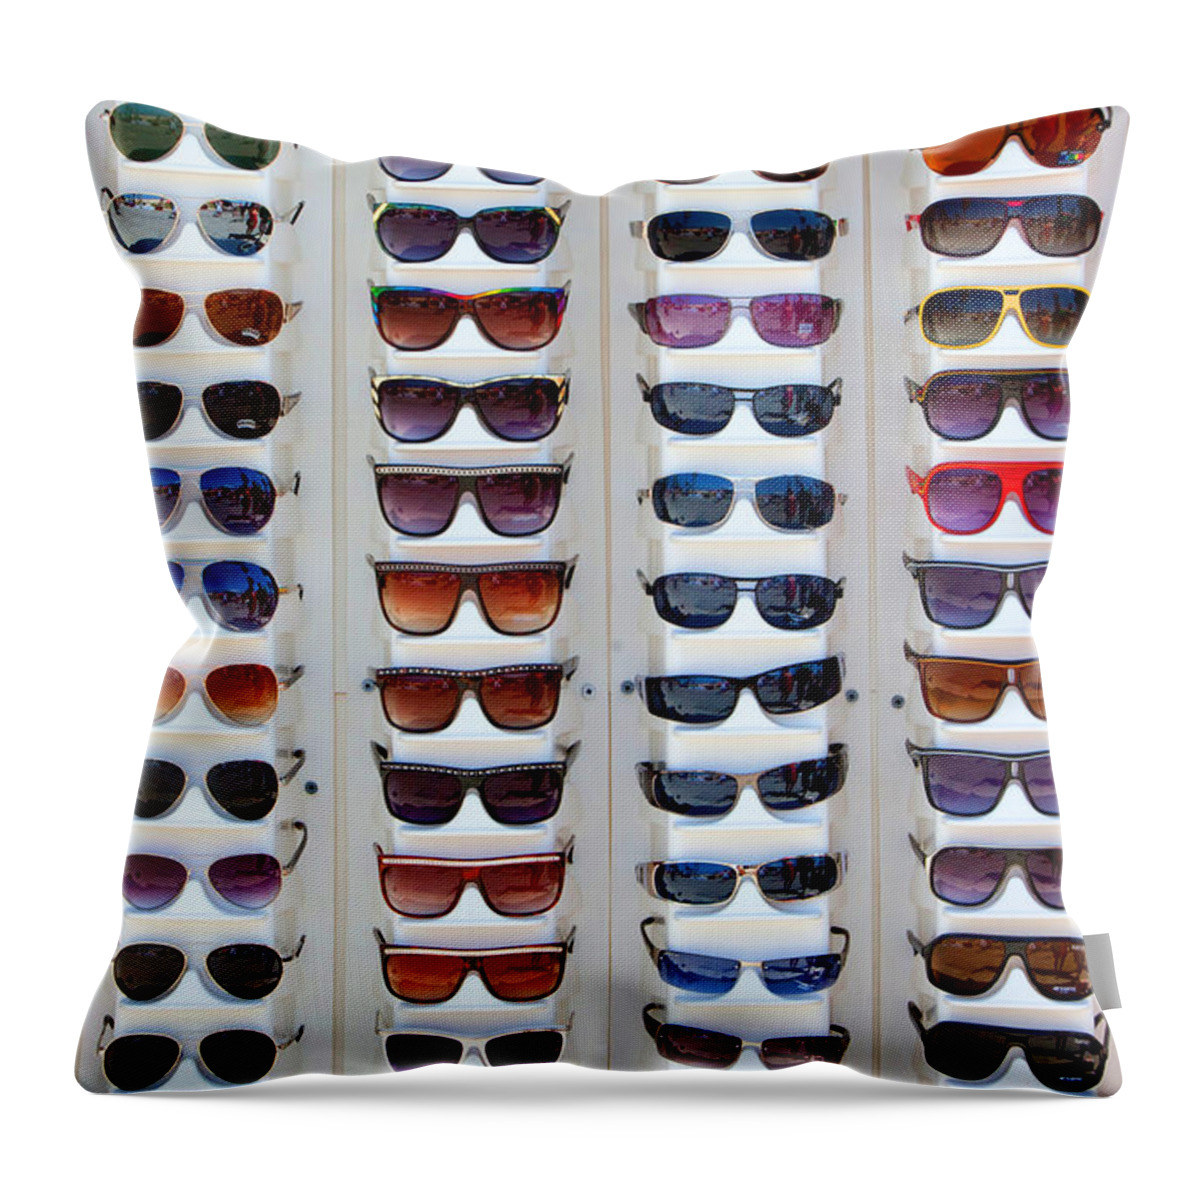 Venice California Throw Pillow featuring the photograph Venice Beach Shades by Art Block Collections